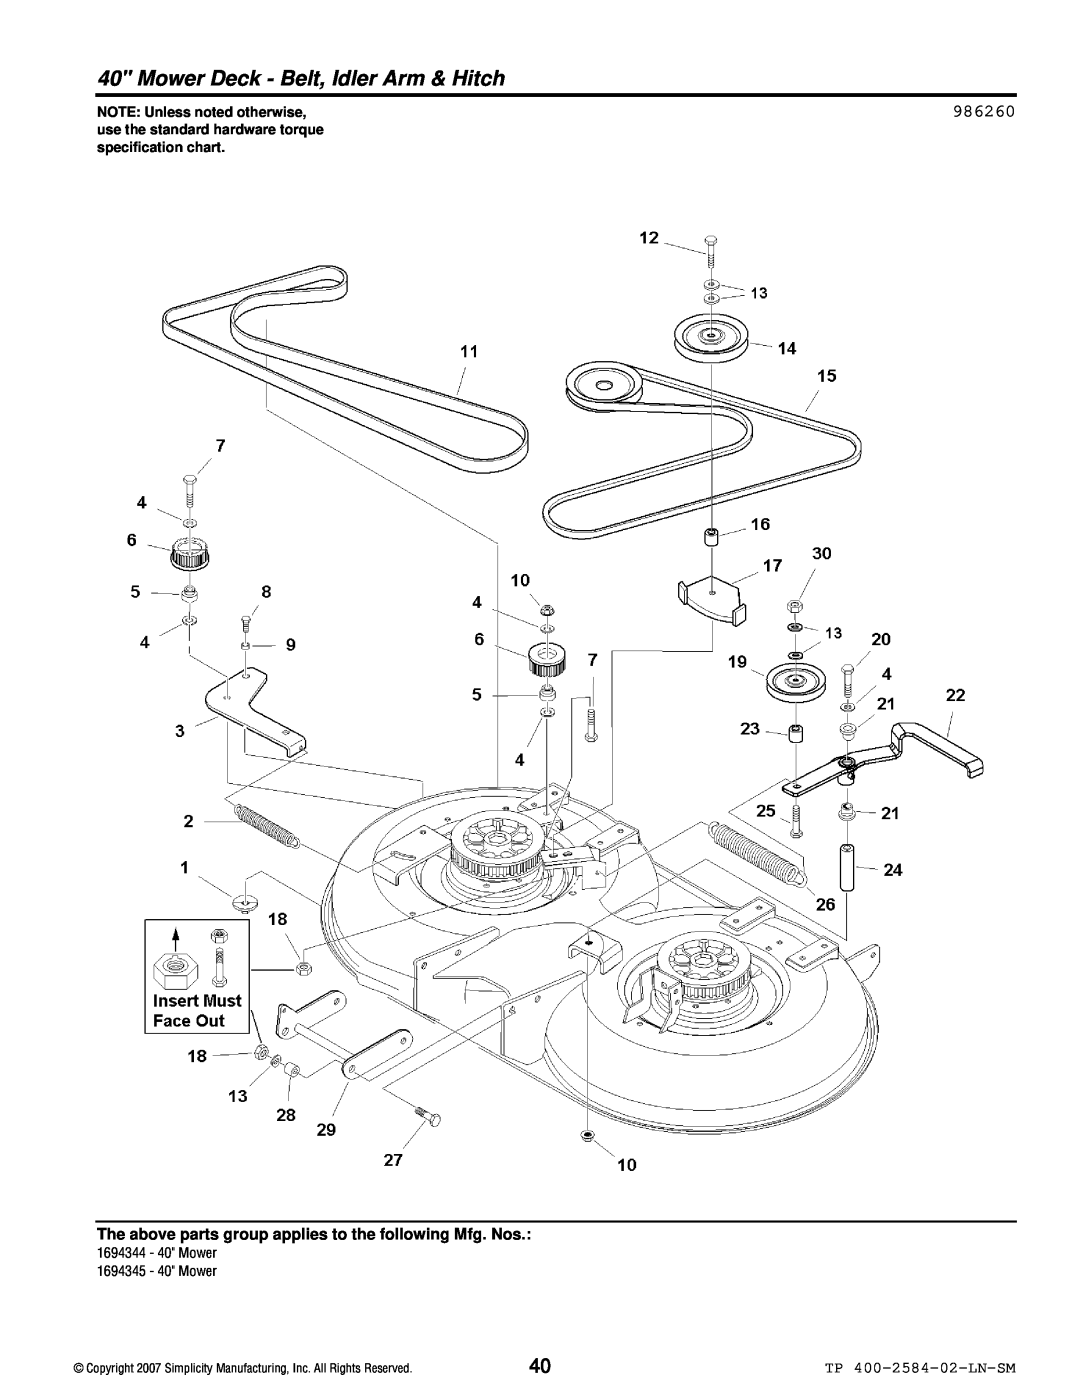 Simplicity Lancer / 4400 986260, Mower Deck - Belt, Idler Arm & Hitch, TP 400-2584-02-LN-SM, NOTE Unless noted otherwise 